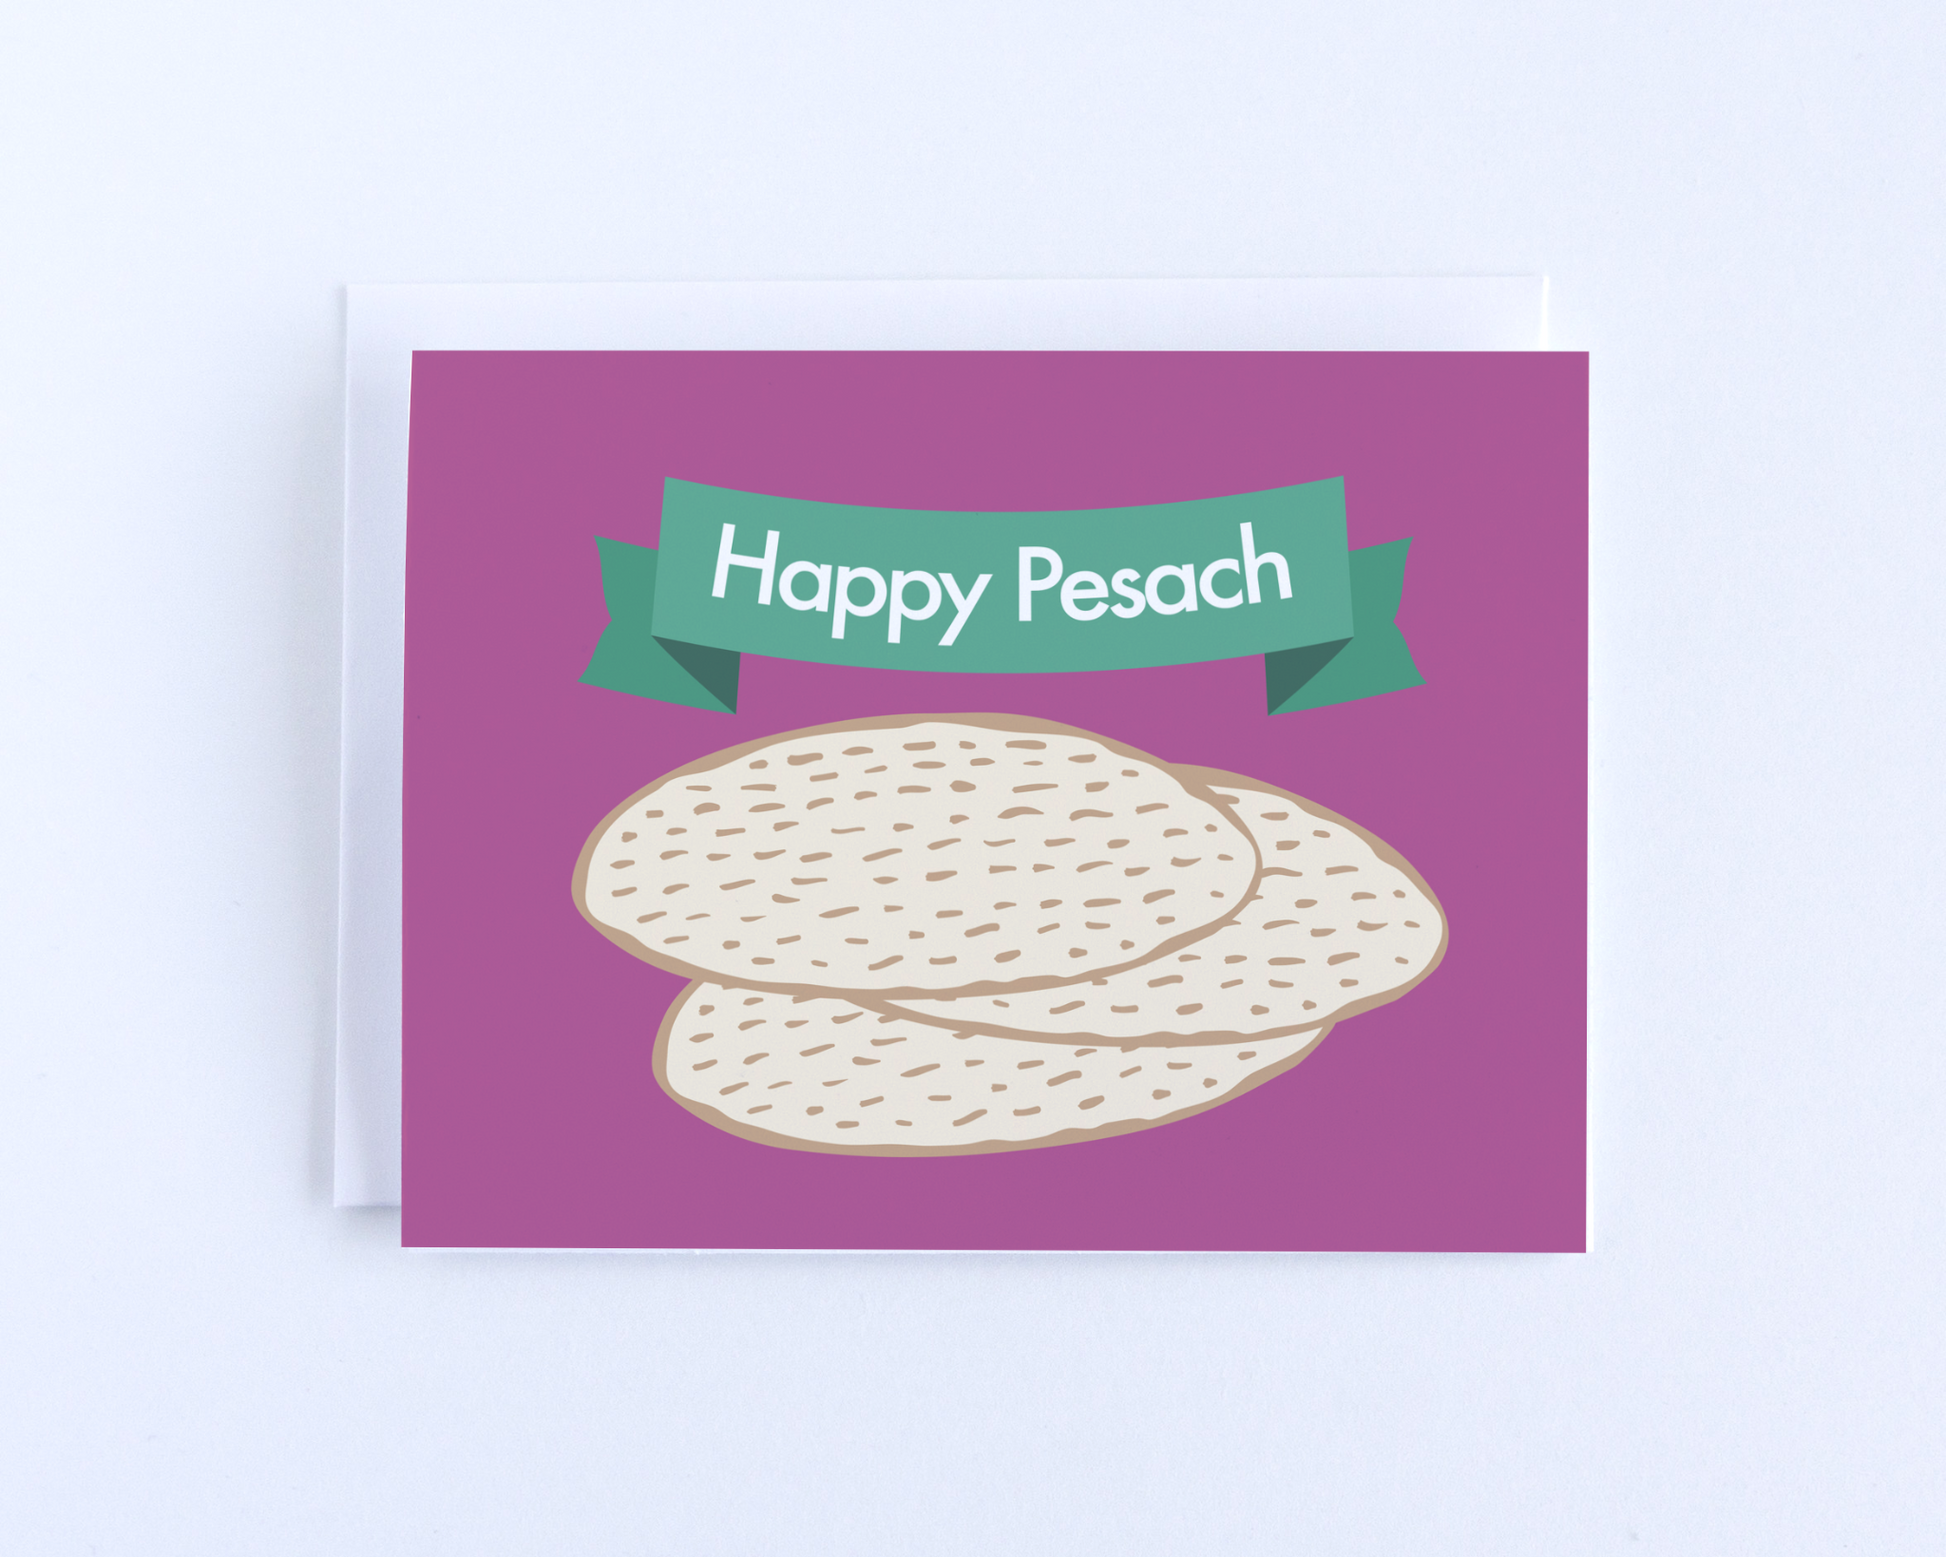 Happy Pesach - Happy Passover Greeting Card.